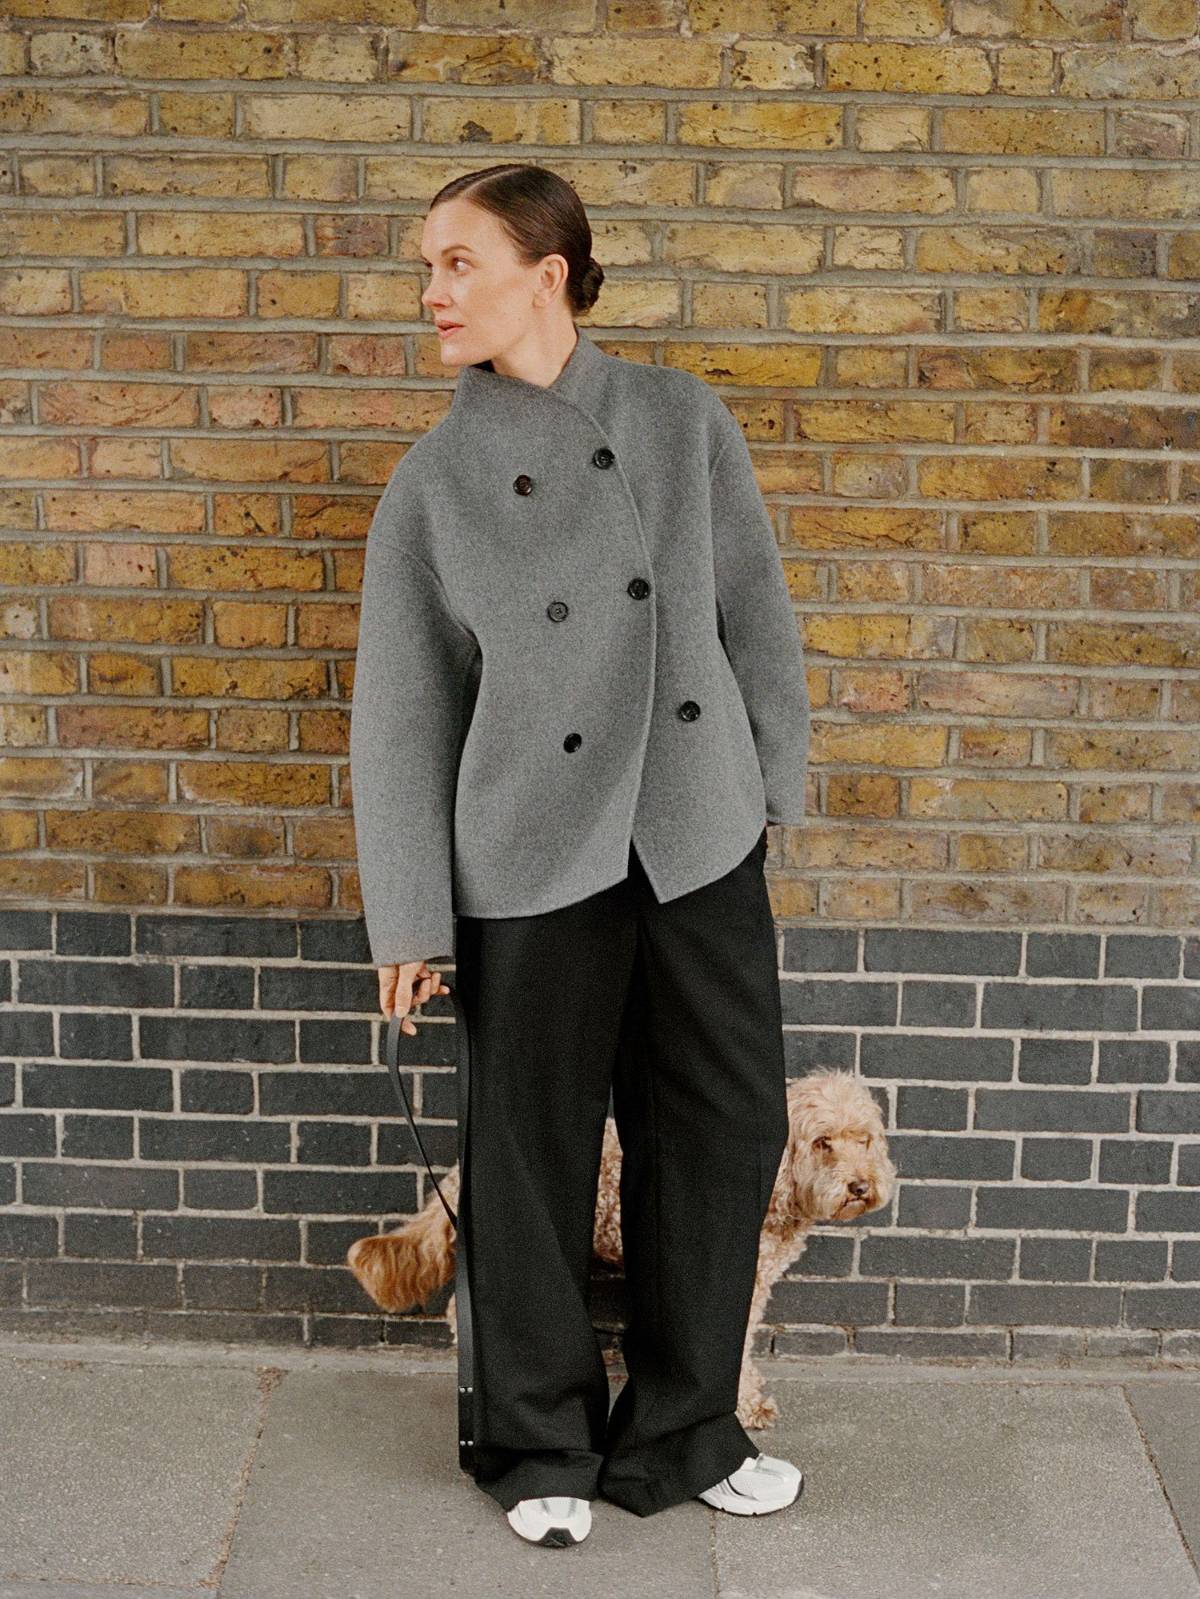 ARKET Grey Double-Face Wool Jacket, ARKET Black Wide Wool Blend Trousers, New Balance White 530 Trainers